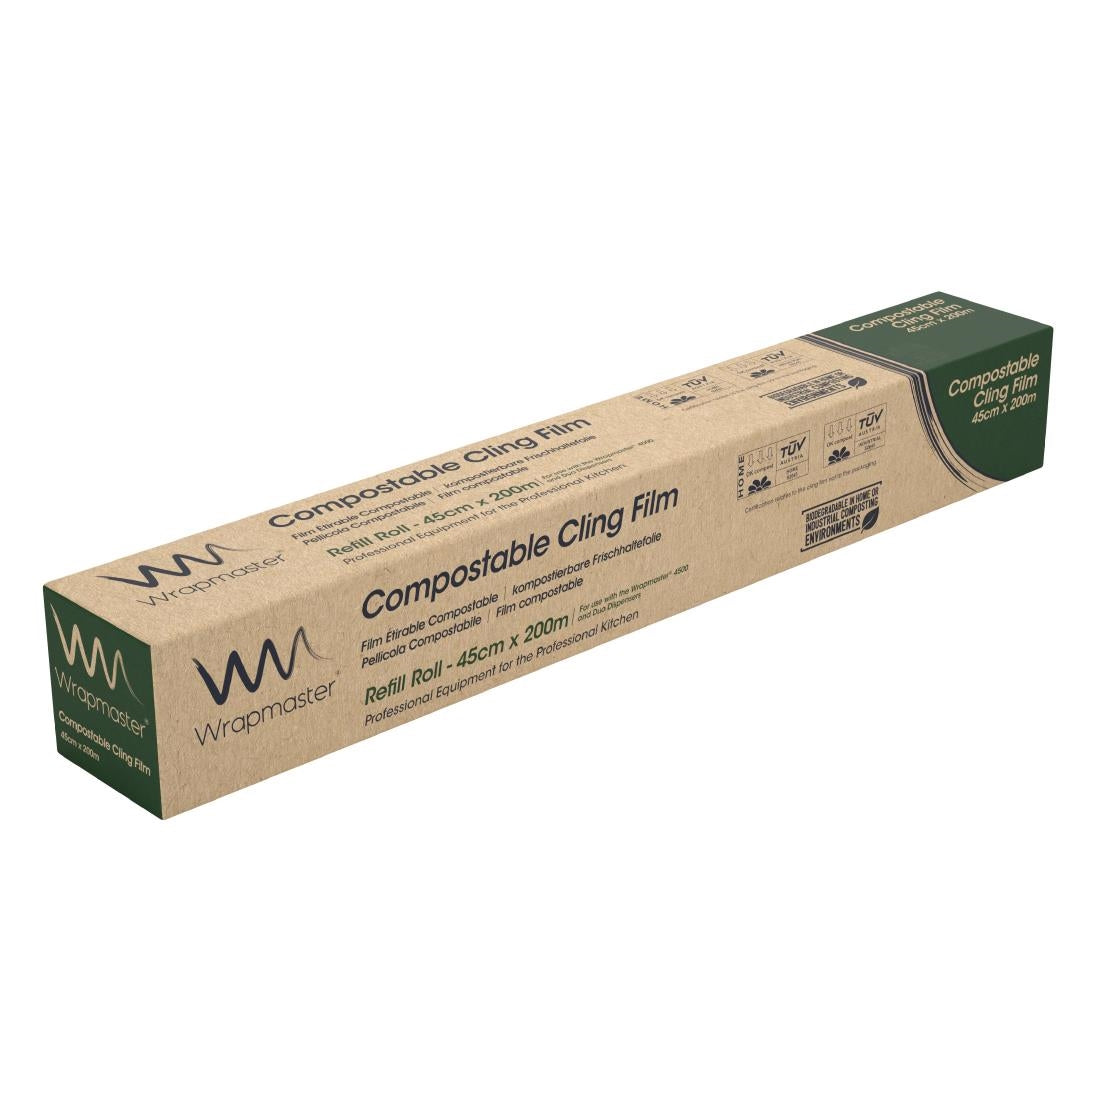 GL383 Wrapmaster Compostable Cling Film Refill for Wrapmaster 4500 450mm x 200m